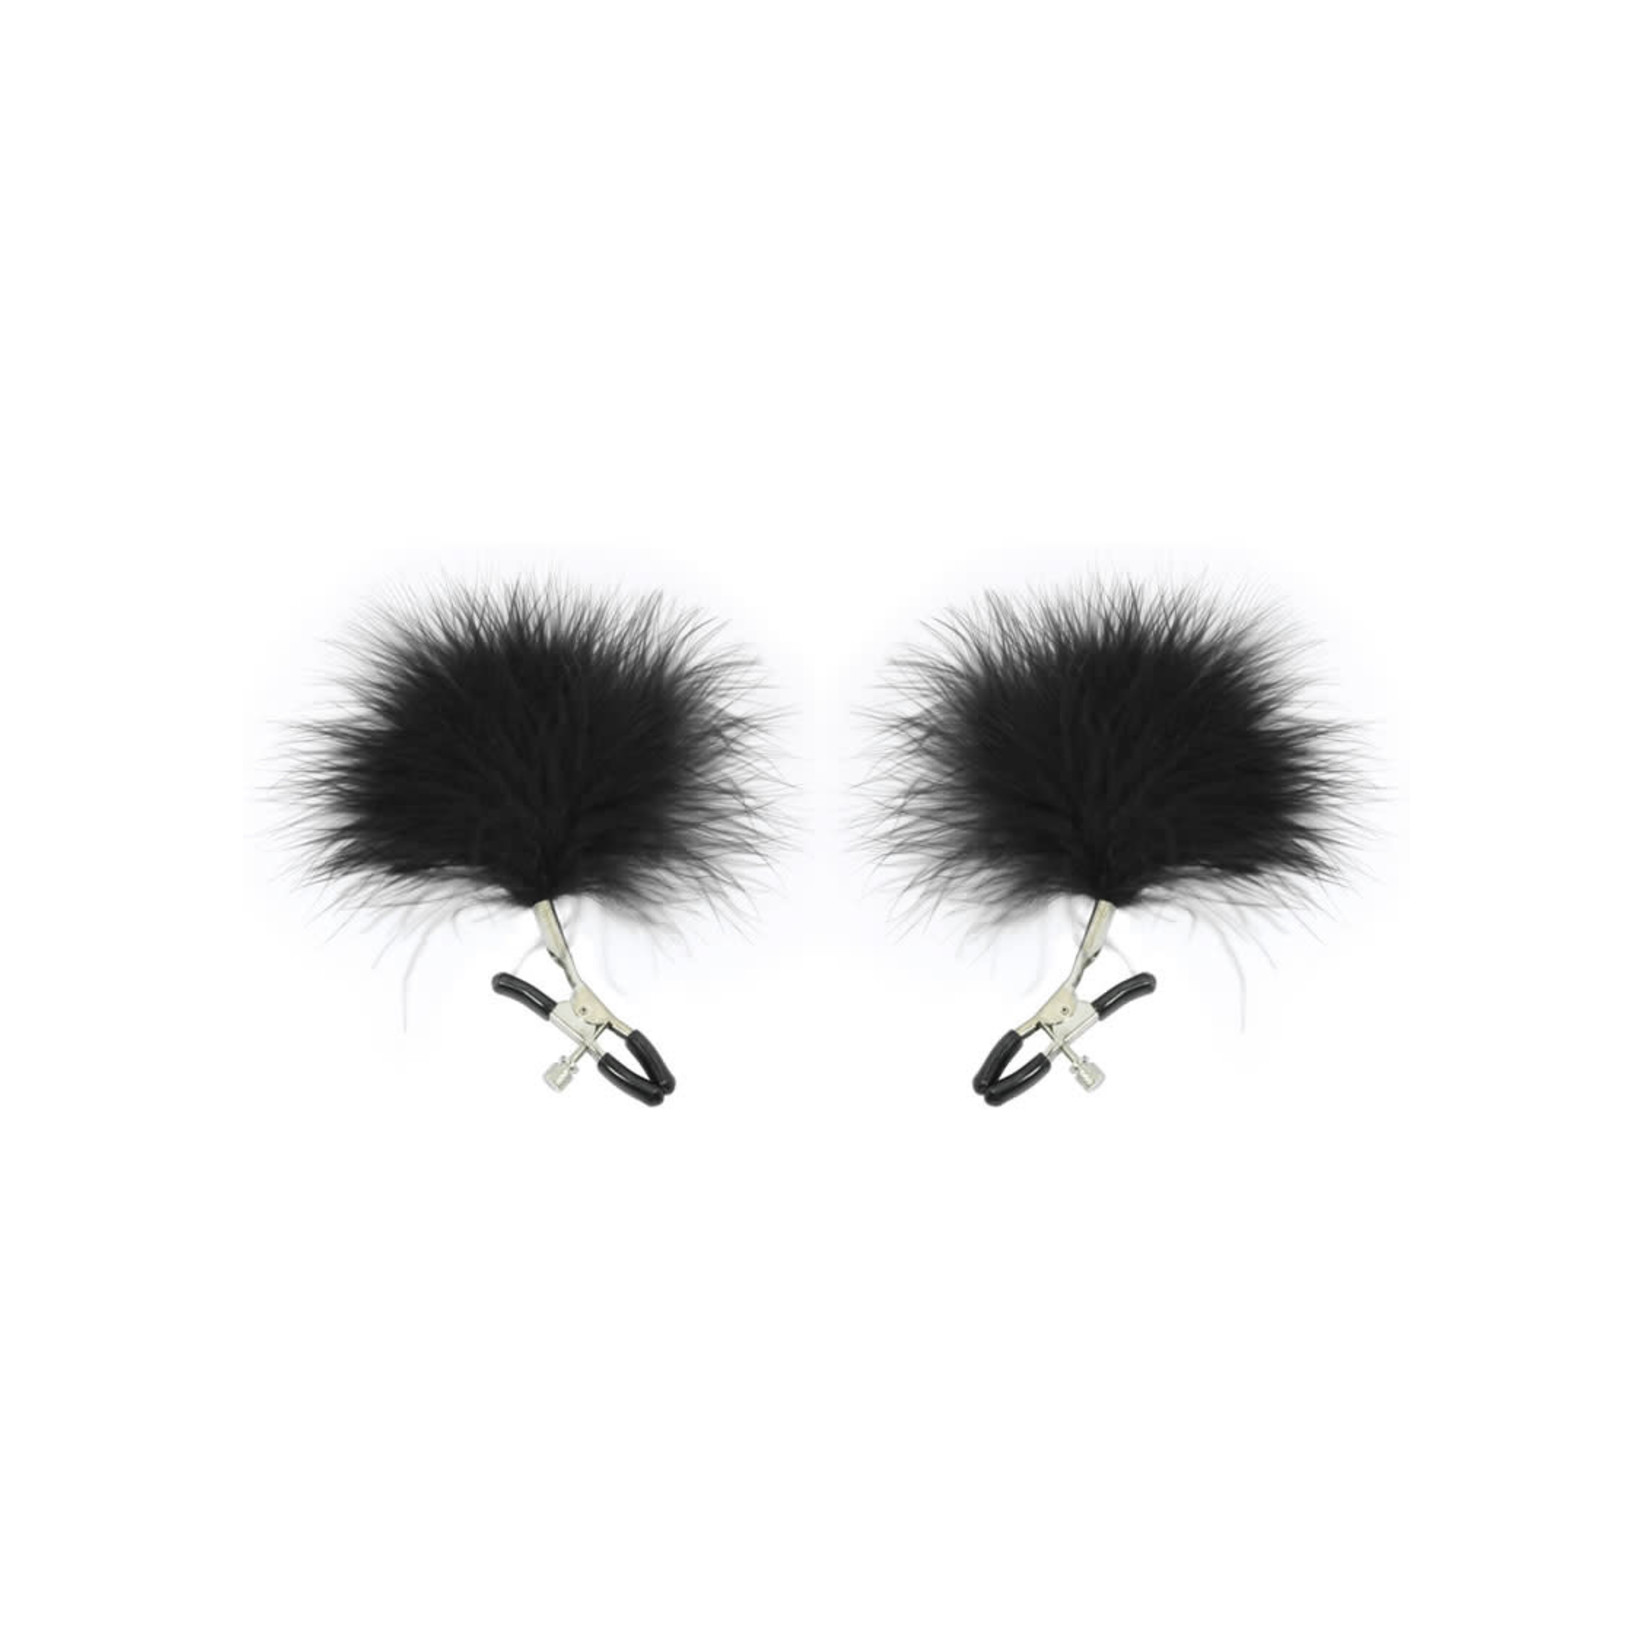 Sex & Mischief Feathered Nipple Clamps - Black